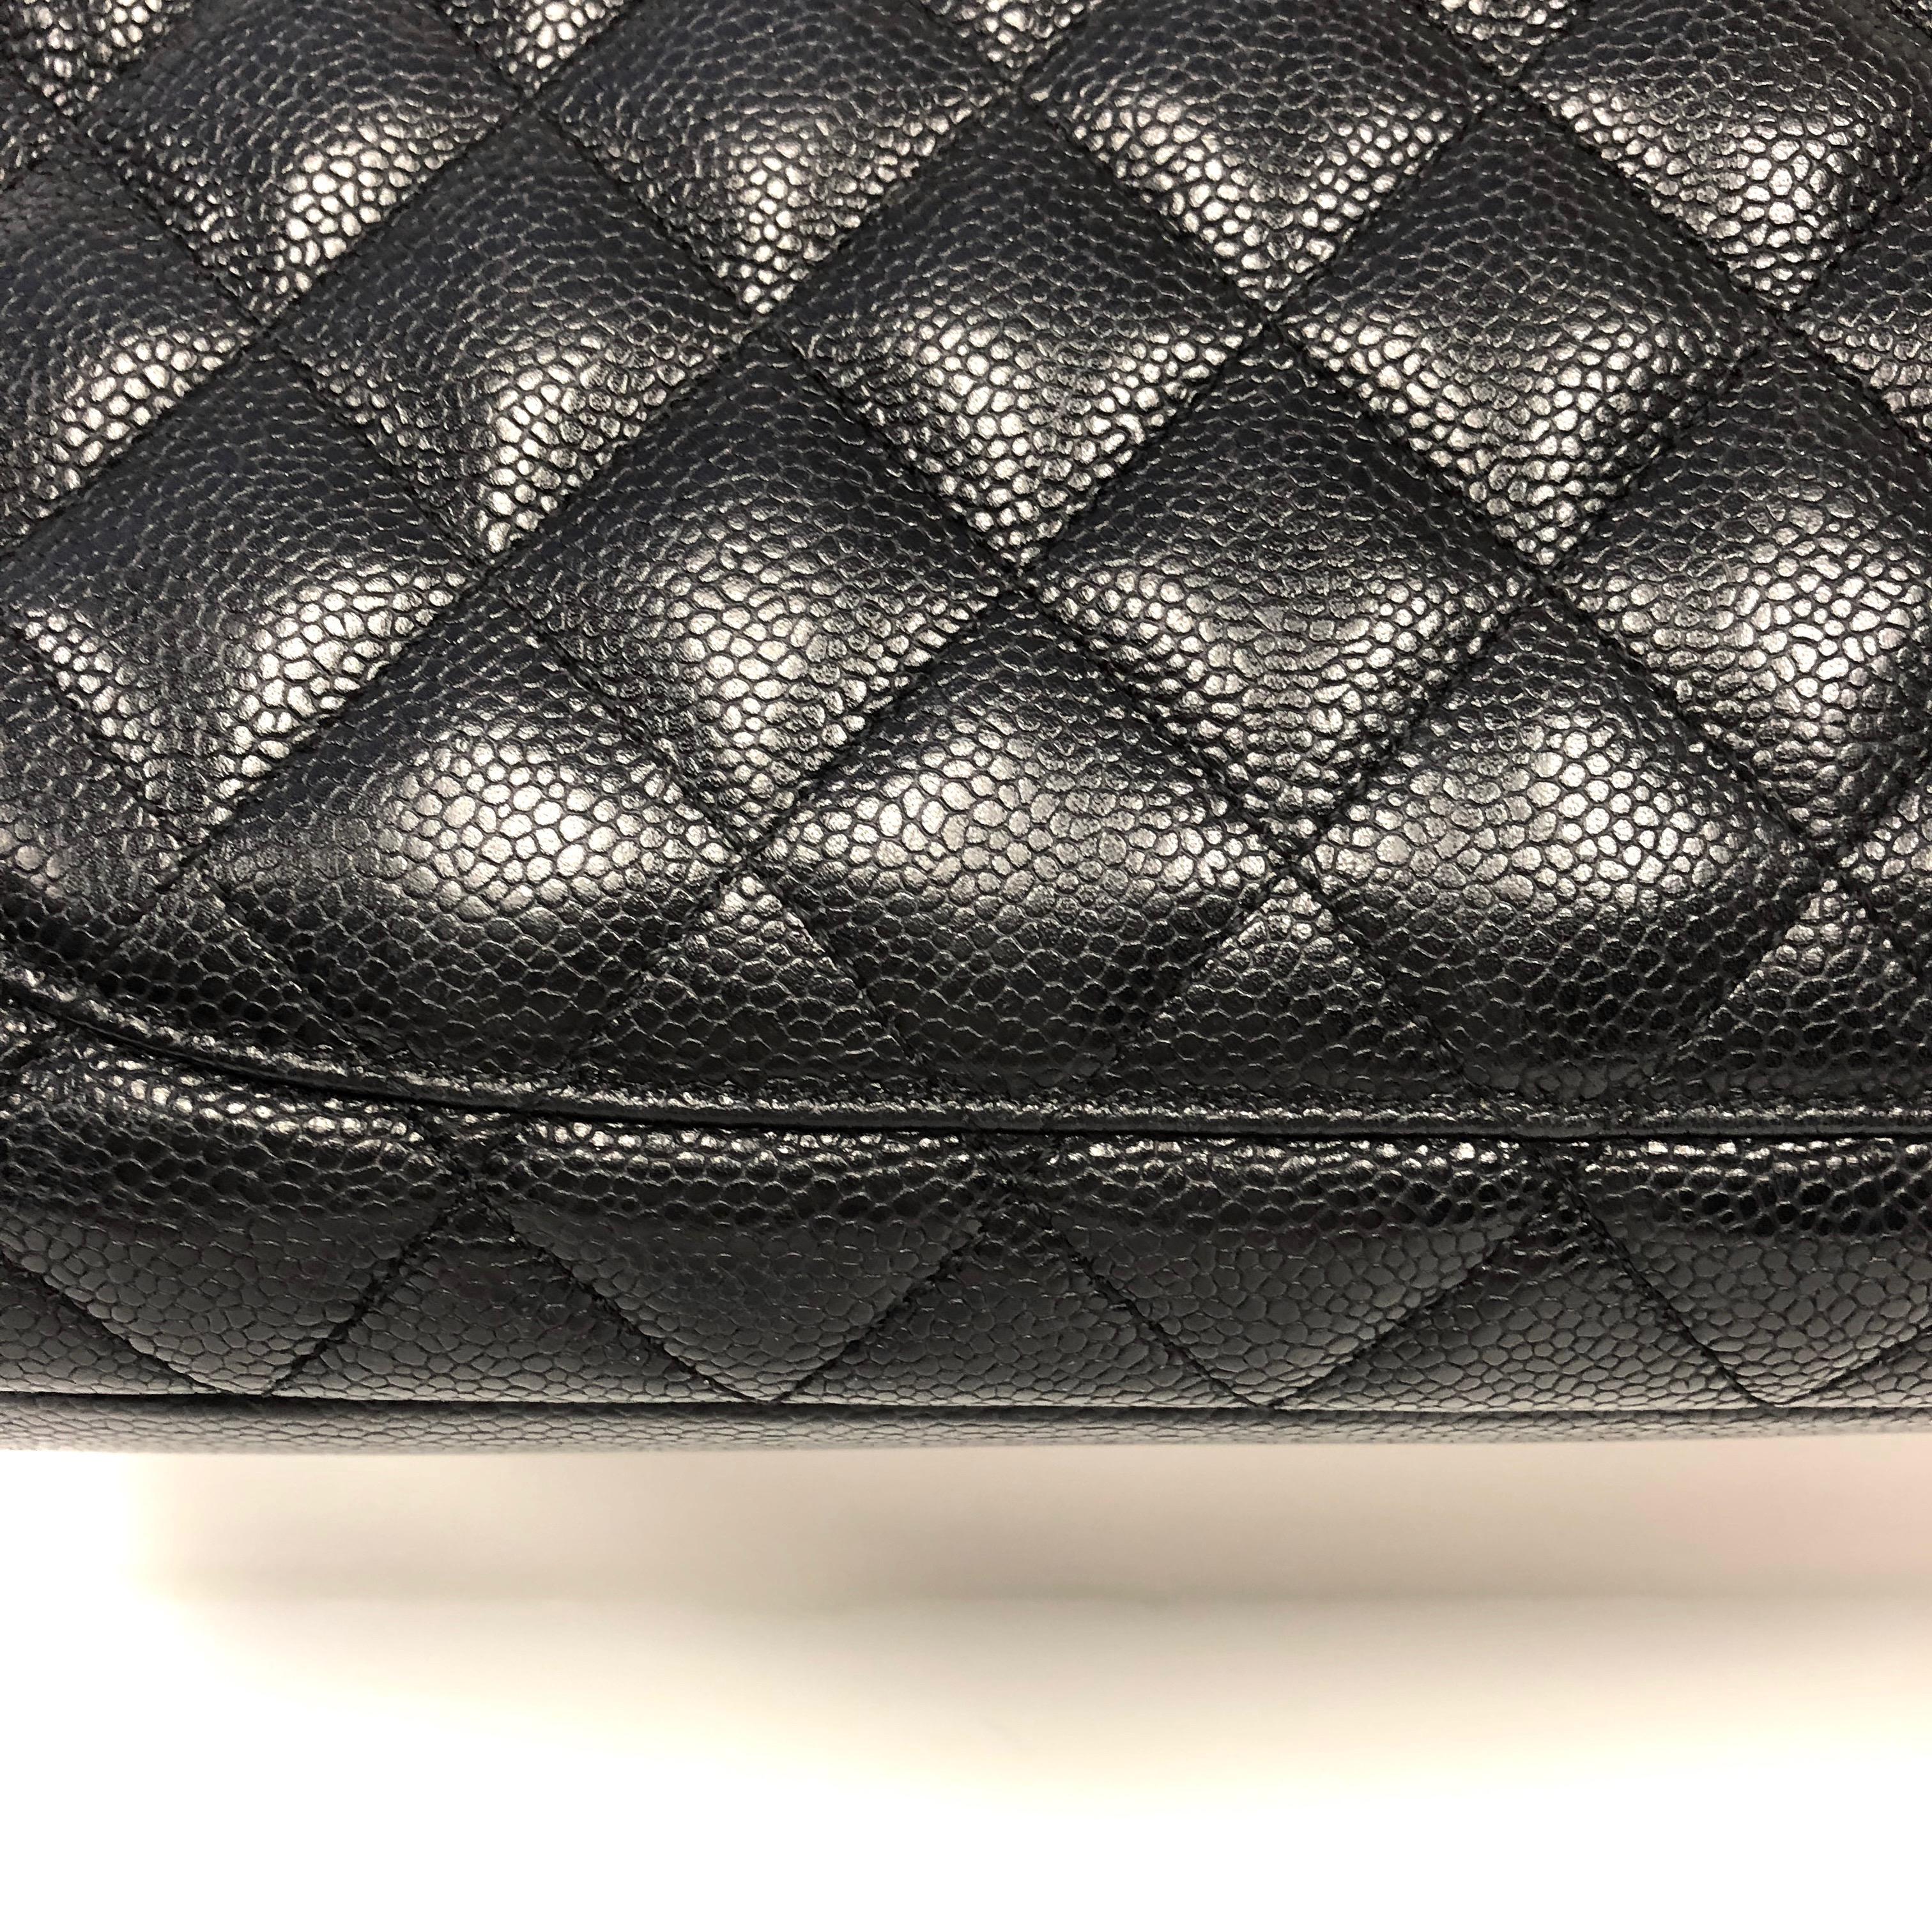 CHANEL Black Caviar Leather Grand Shopping Tote Bag 4